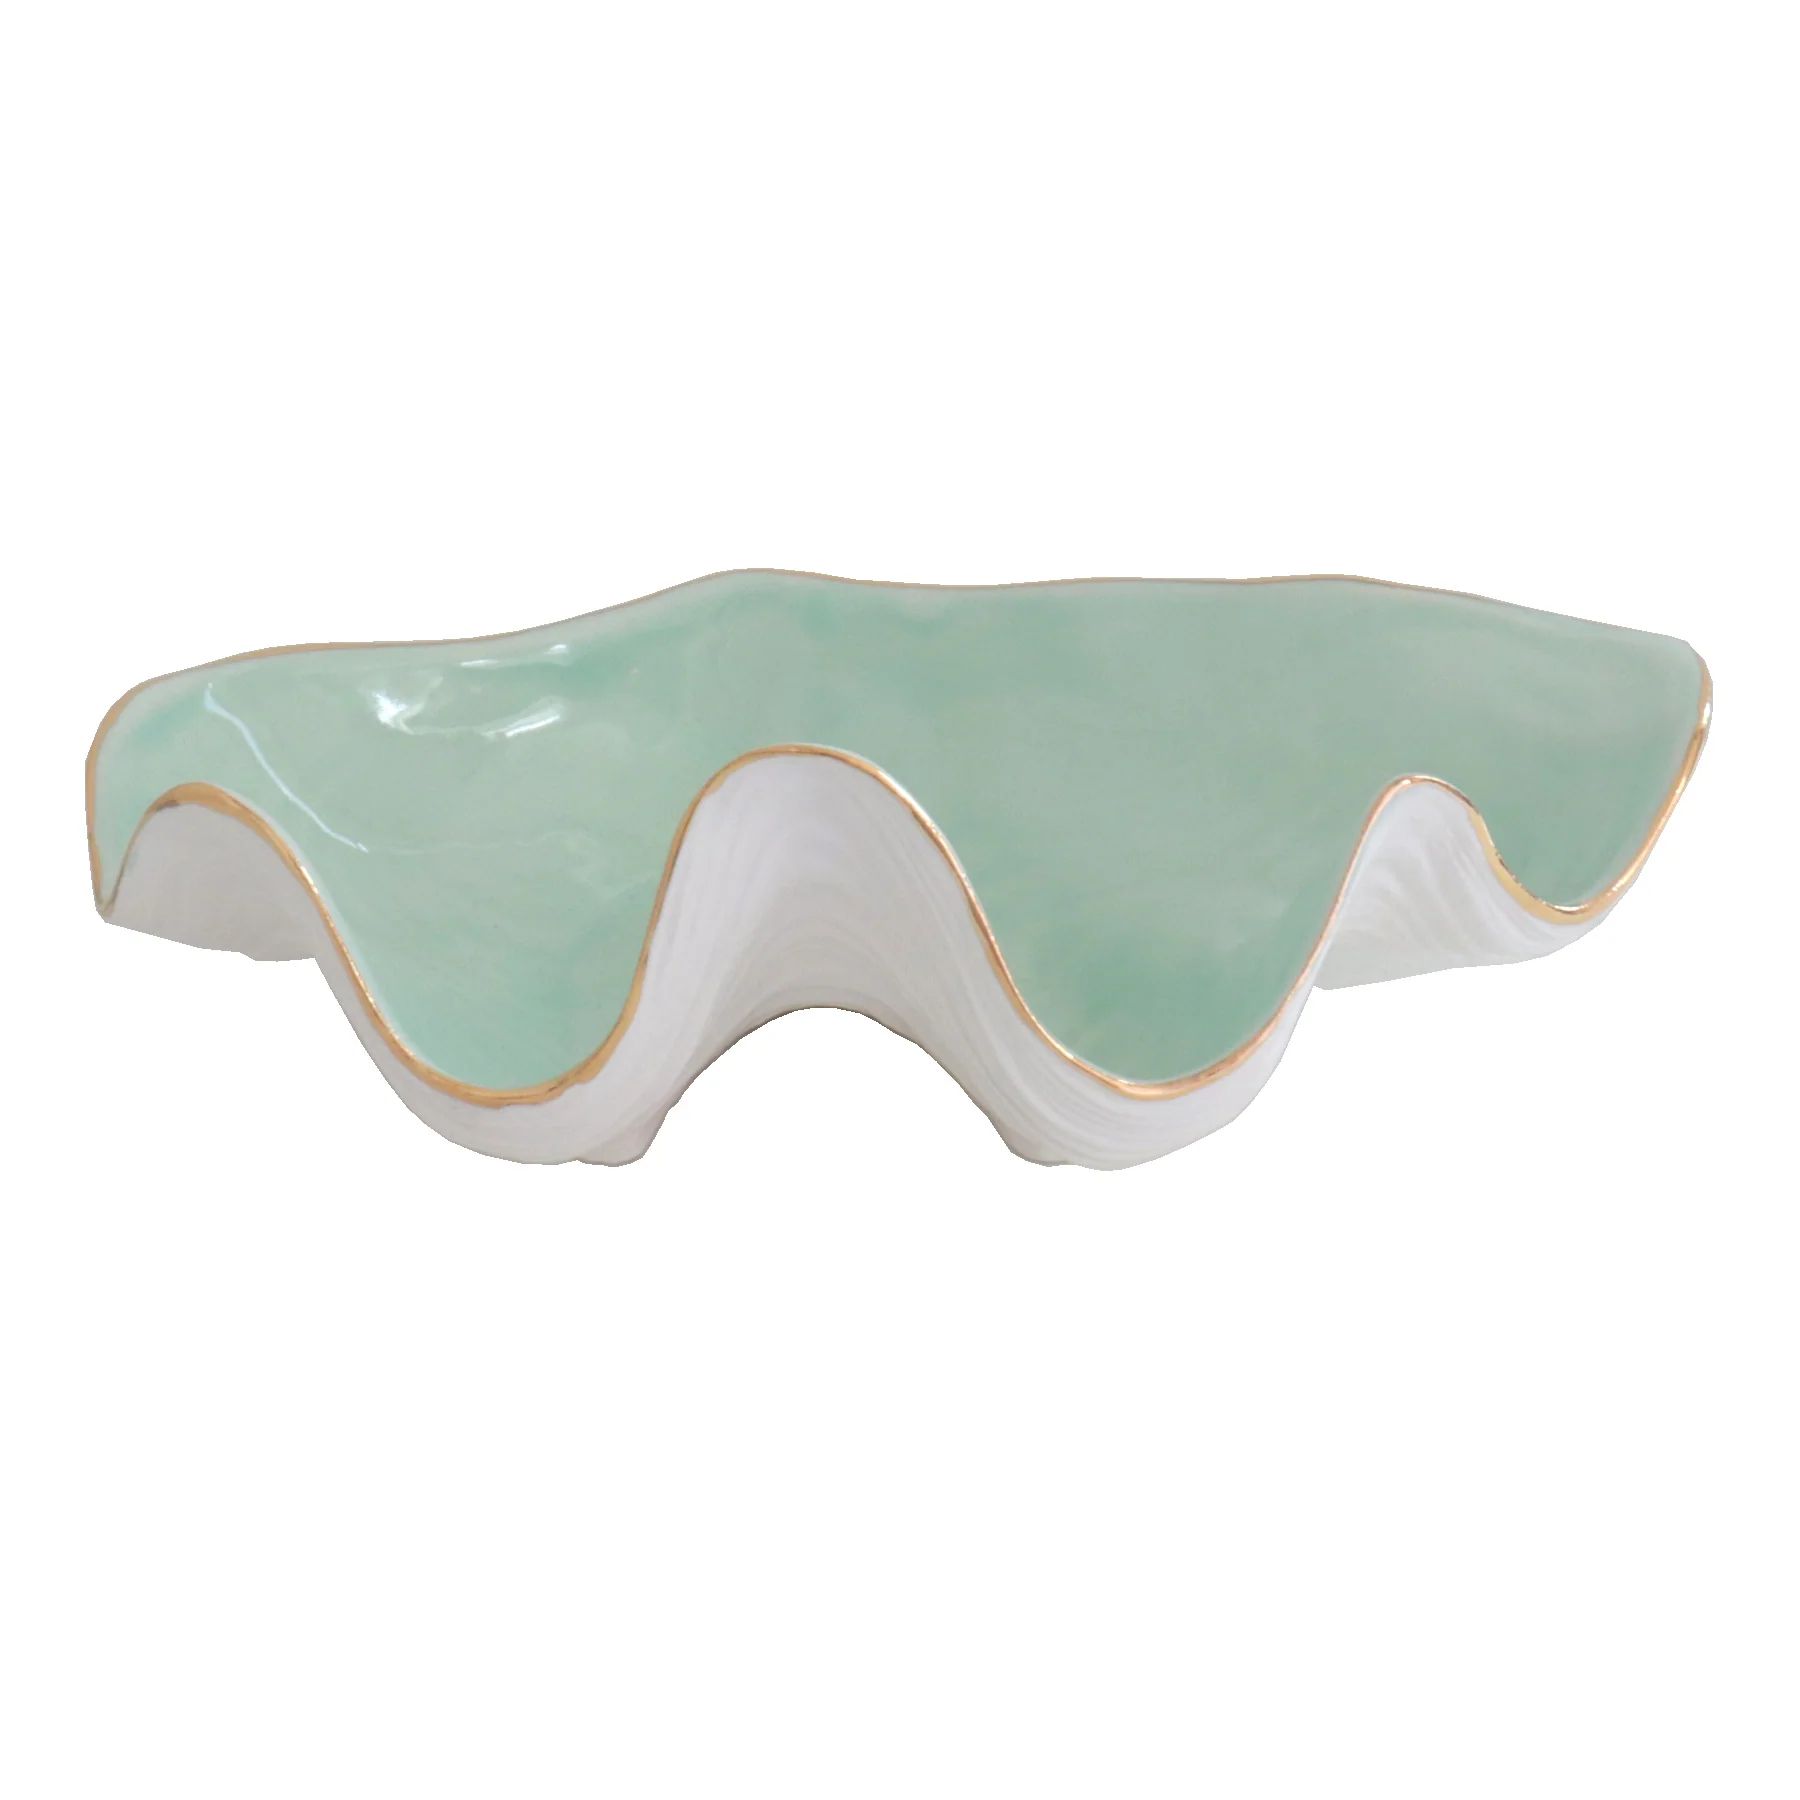 Clam Shell Bowl with 22K Gold Accent | Lo Home by Lauren Haskell Designs